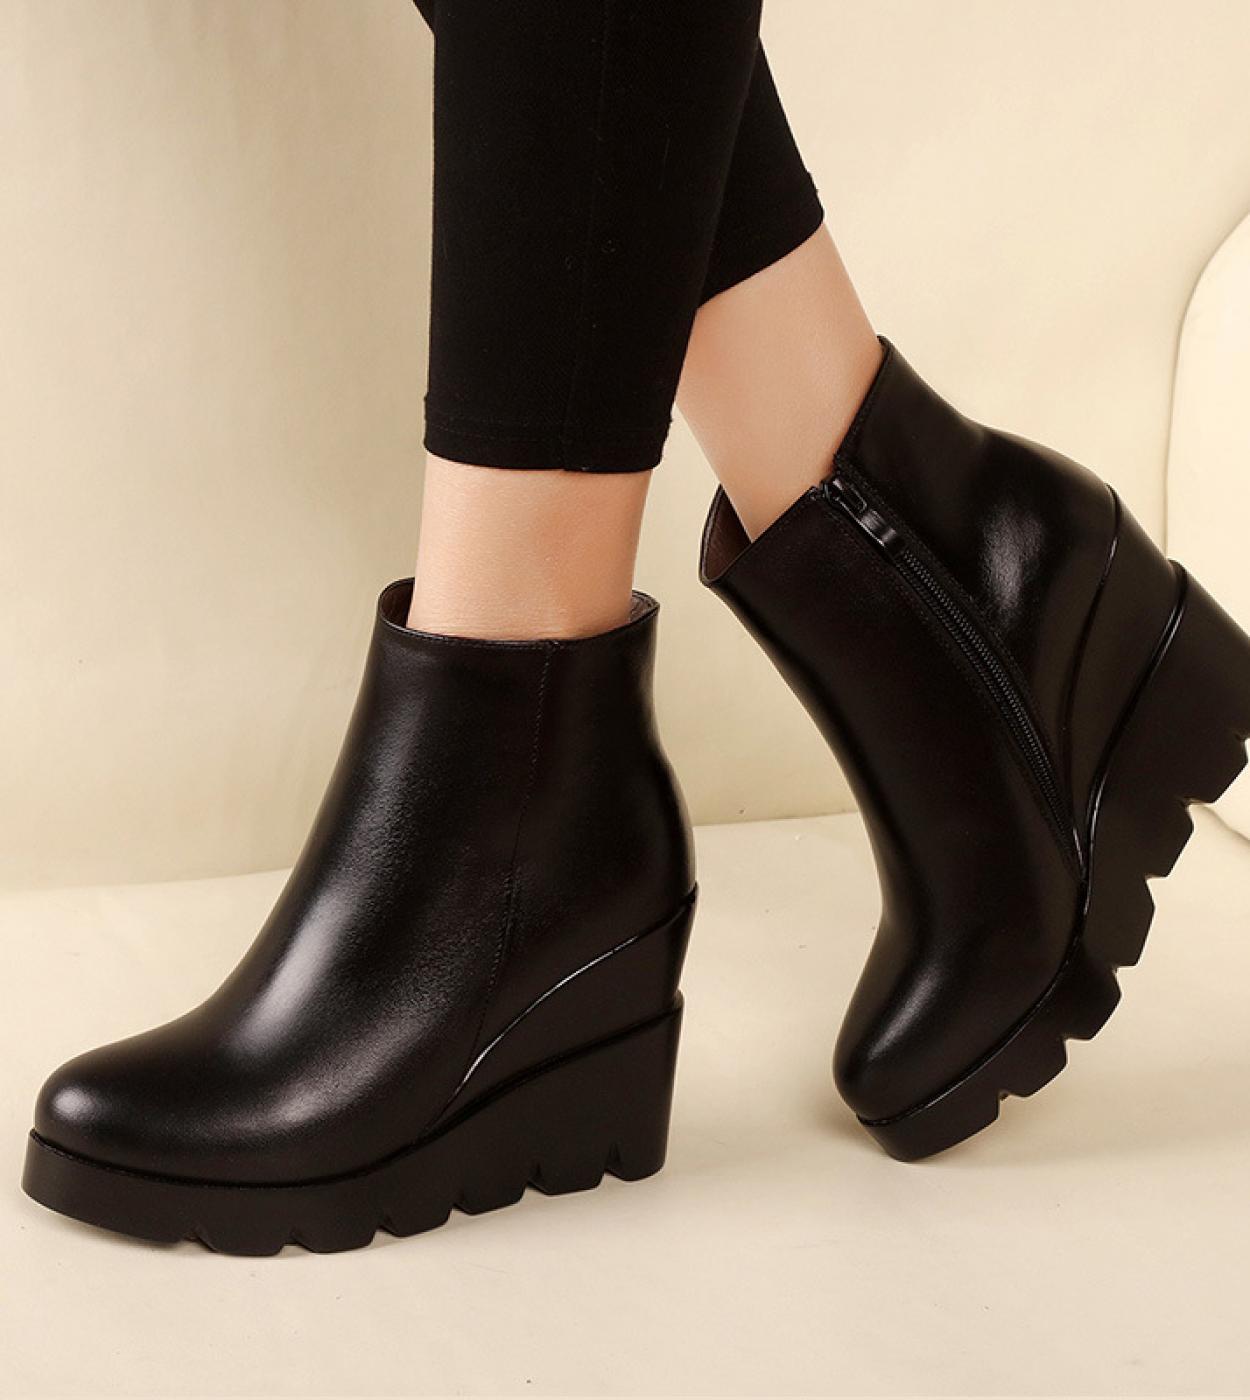 2022 Autumn Winter Soft Leather Platform High Heels Girl Wedges Ankle Boots Shoes For Woman Fashion Boots Women Size 34 